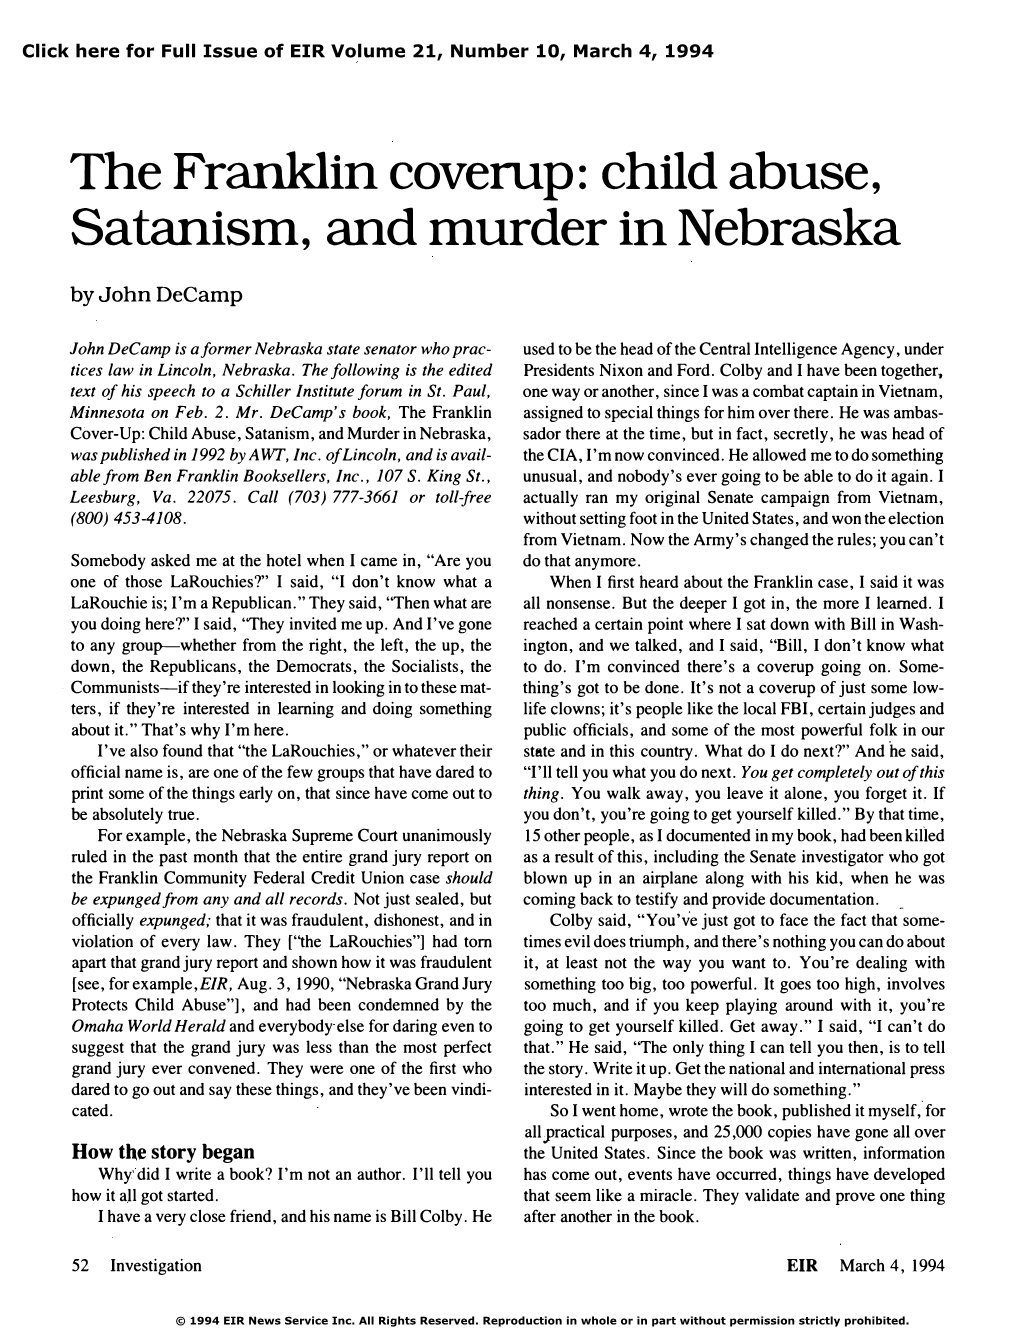 The Franklin Coverup: Child Abuse, Satanism, and Murder in Nebraska